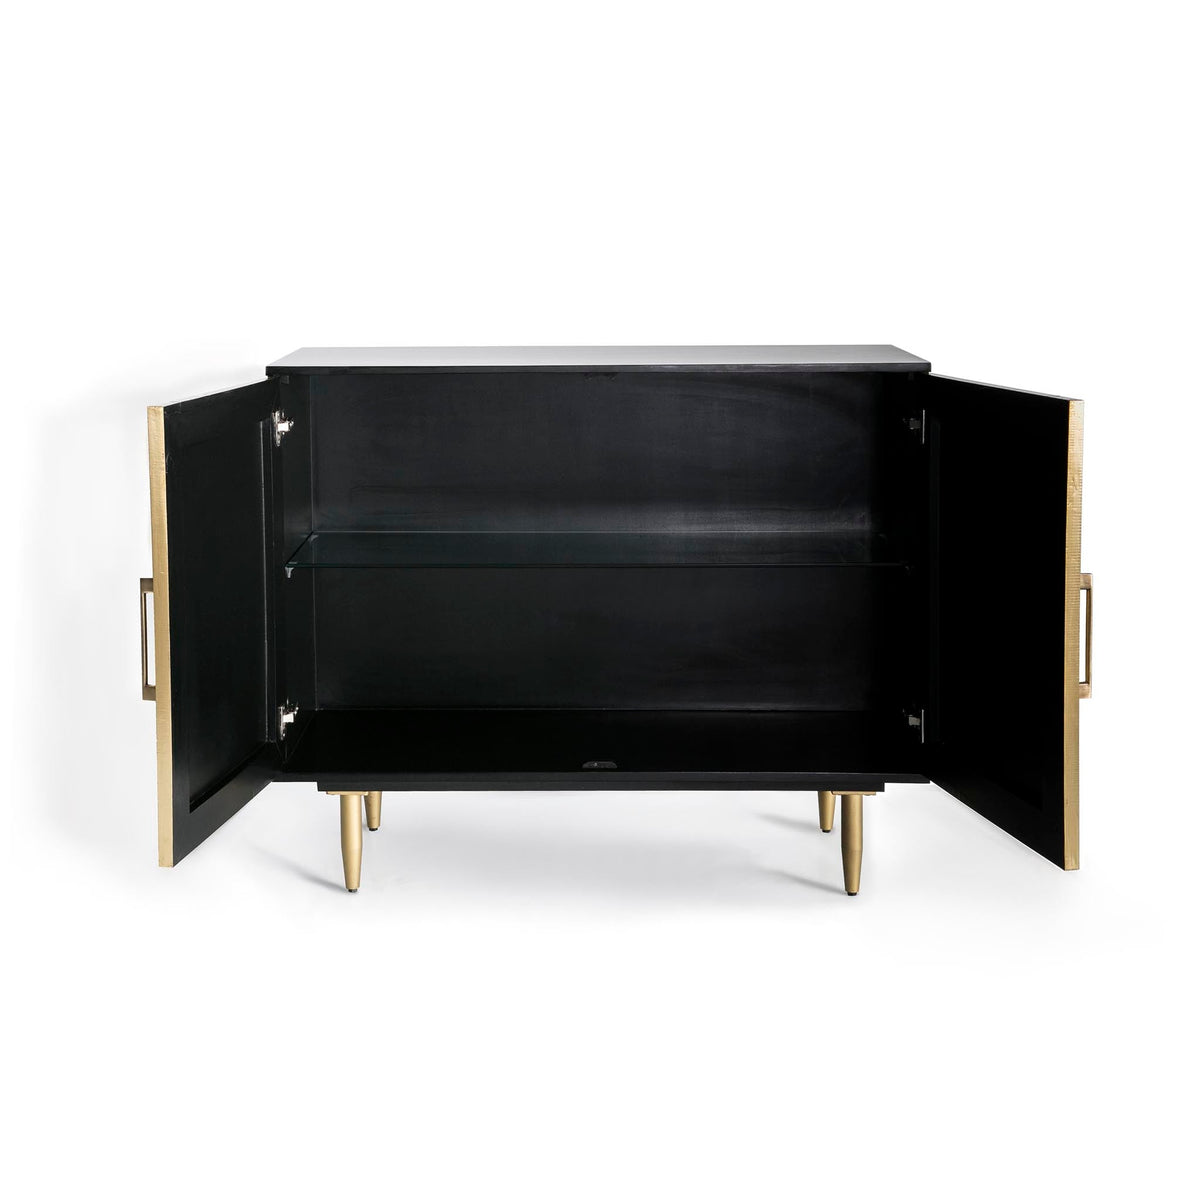 Kandla Gold Metal Cladded Sideboard with Iron Base - With doors open showing glass shelf